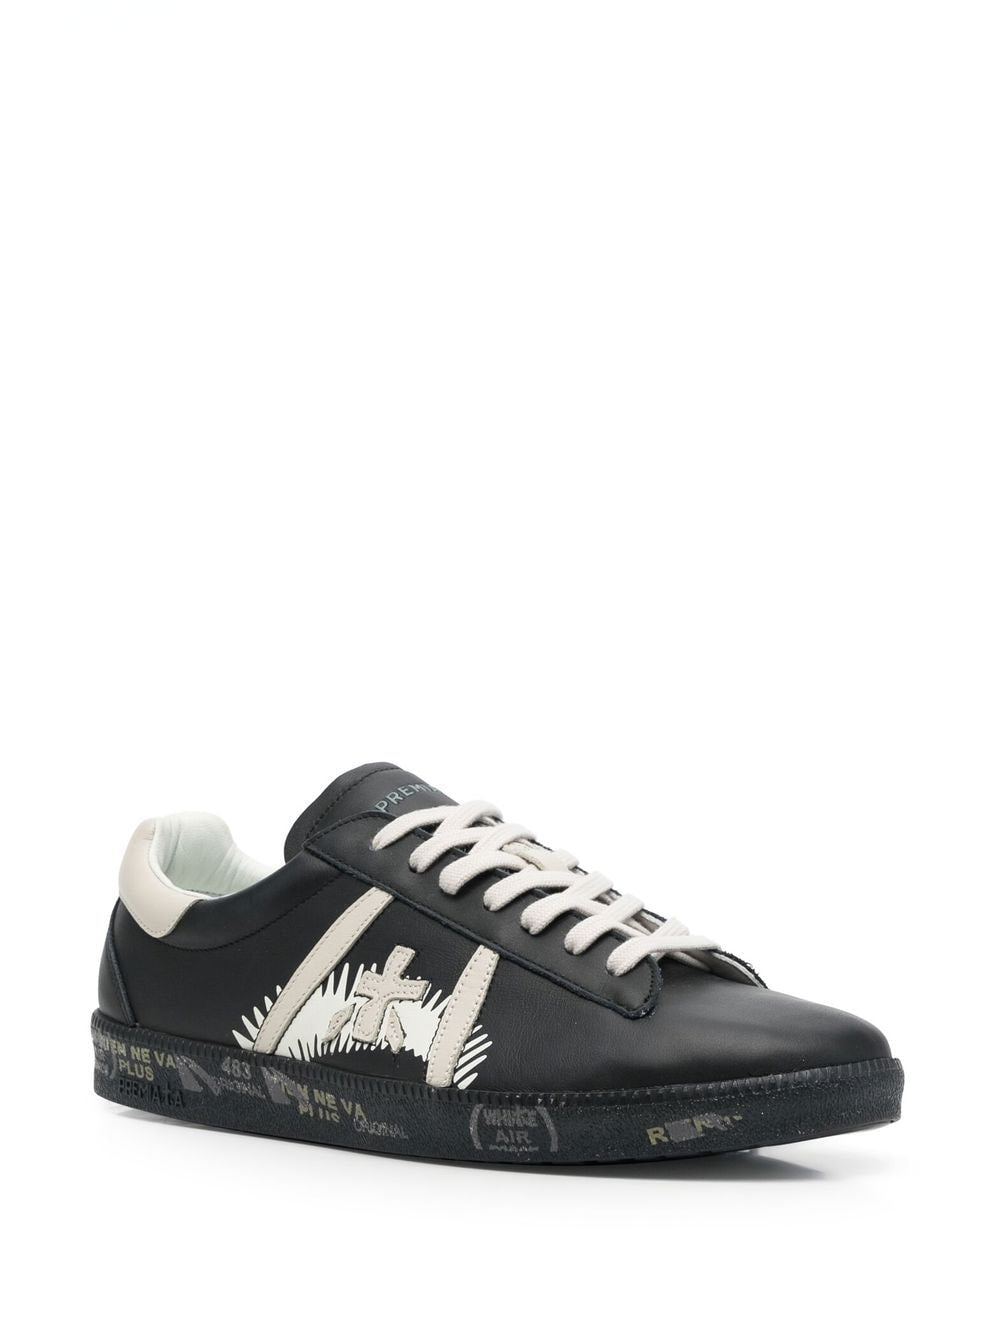 Andy black sneaker with cream accents